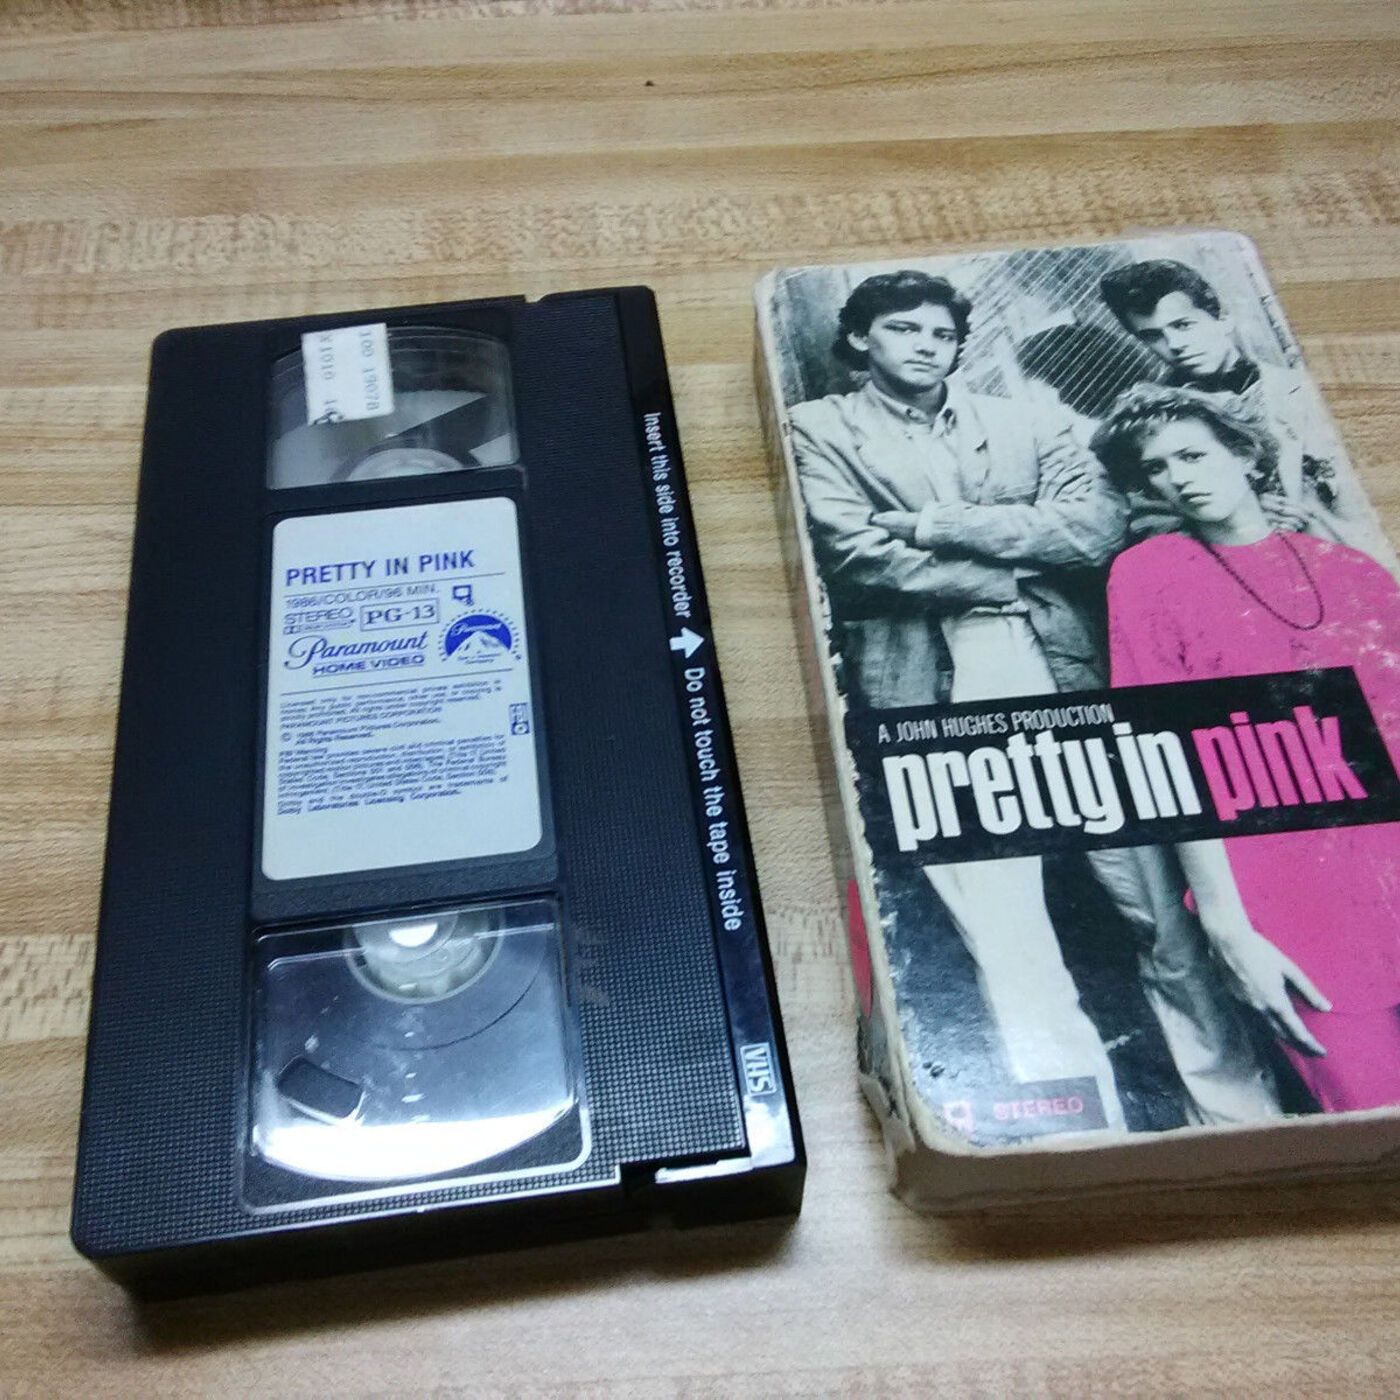 1986 - Pretty in Pink Image